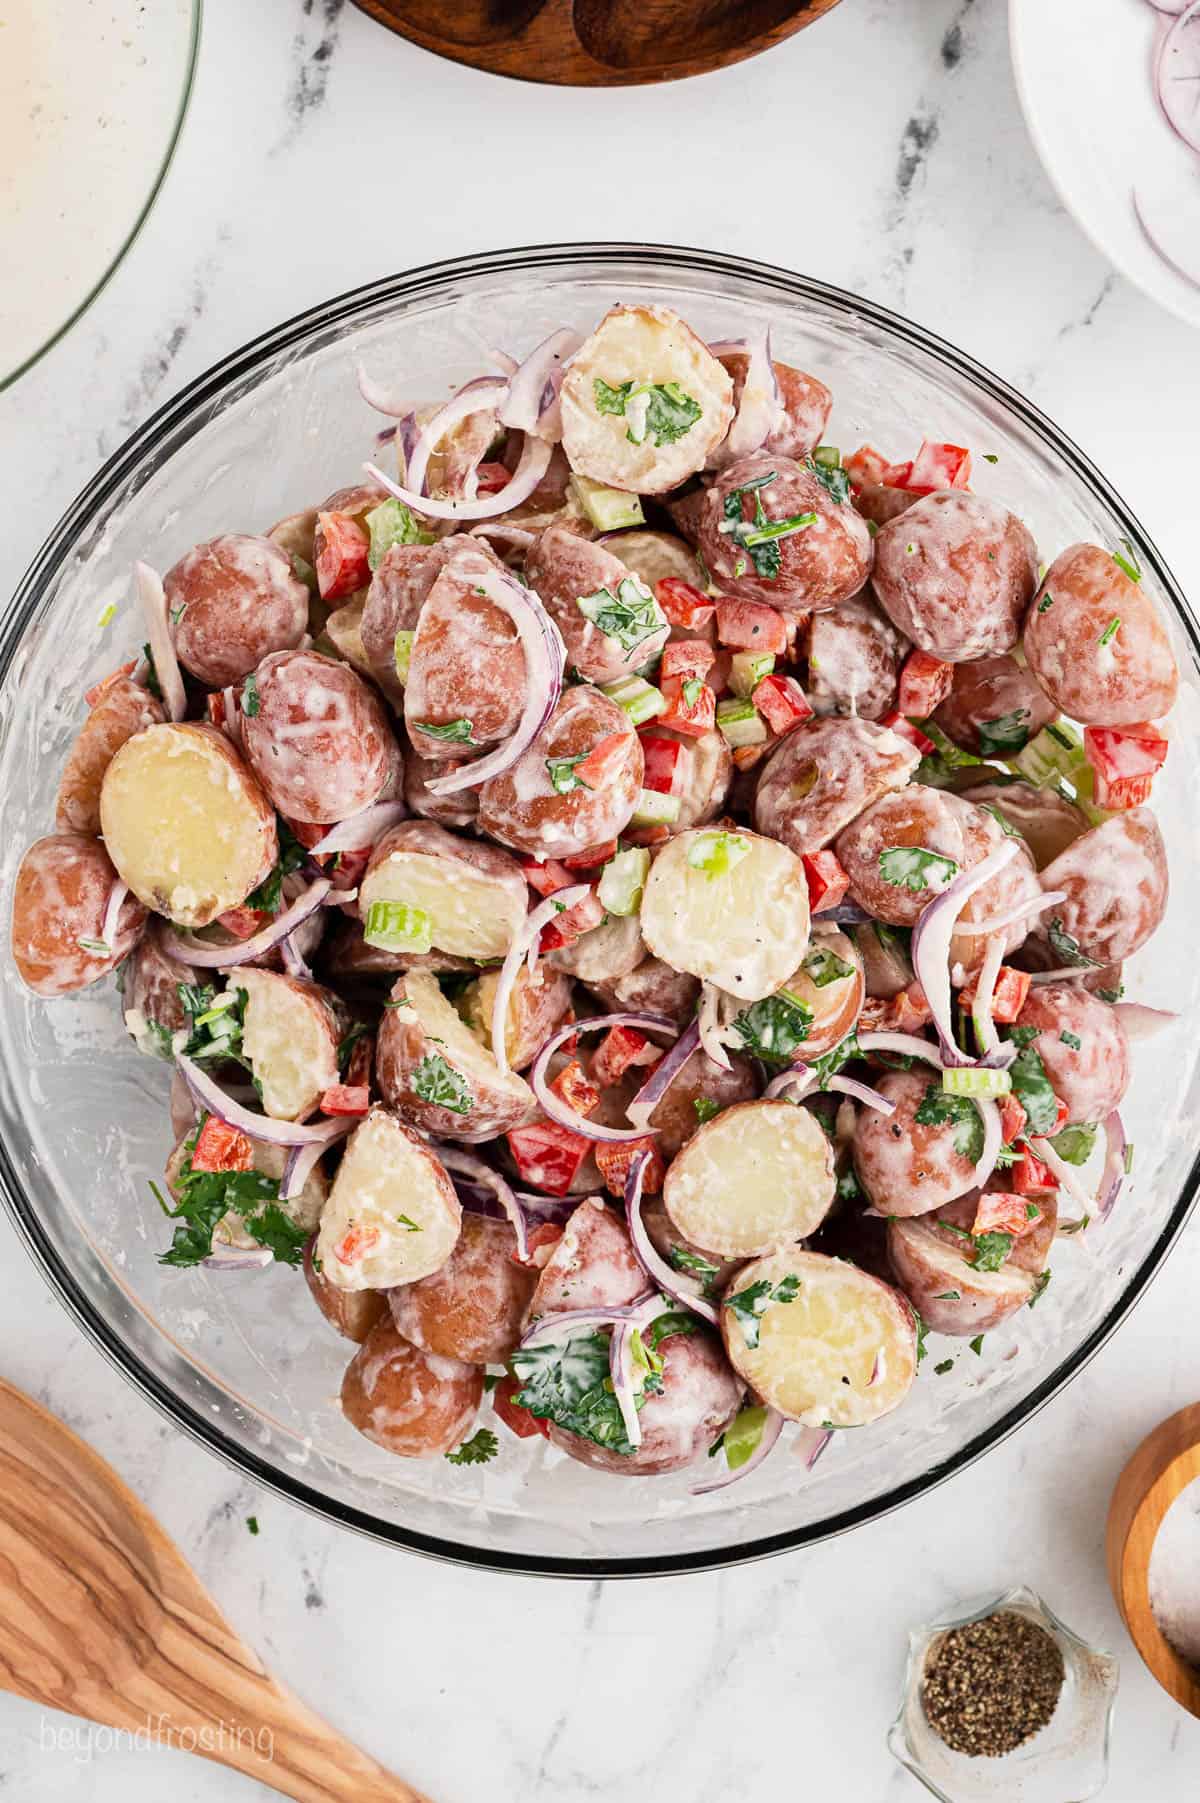 Overhead view of red potato salad in a mixing bowl